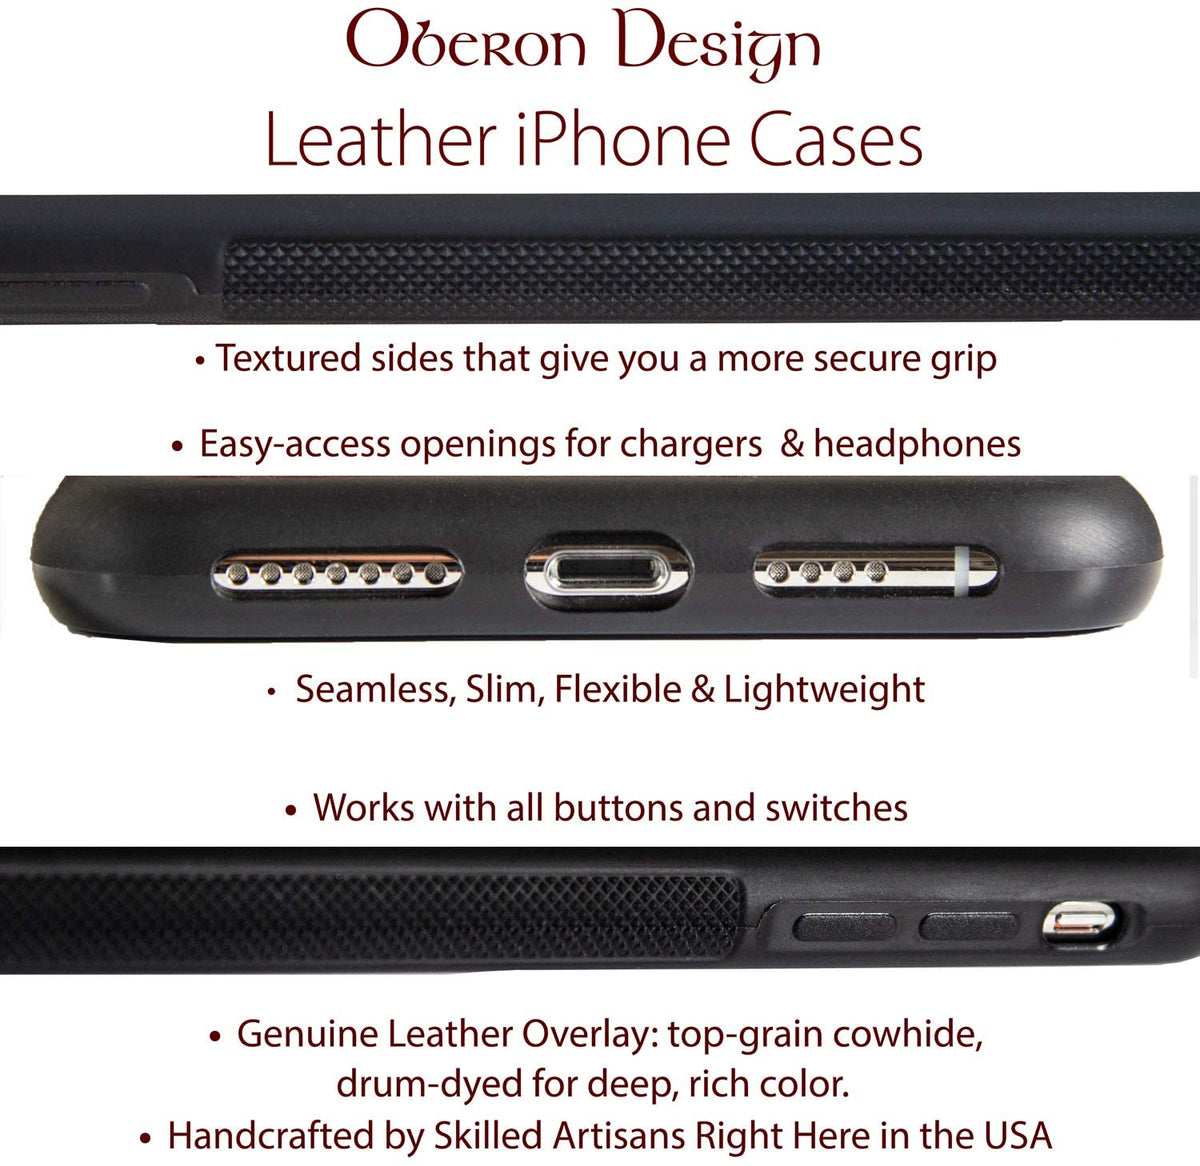 iPhone Case Information